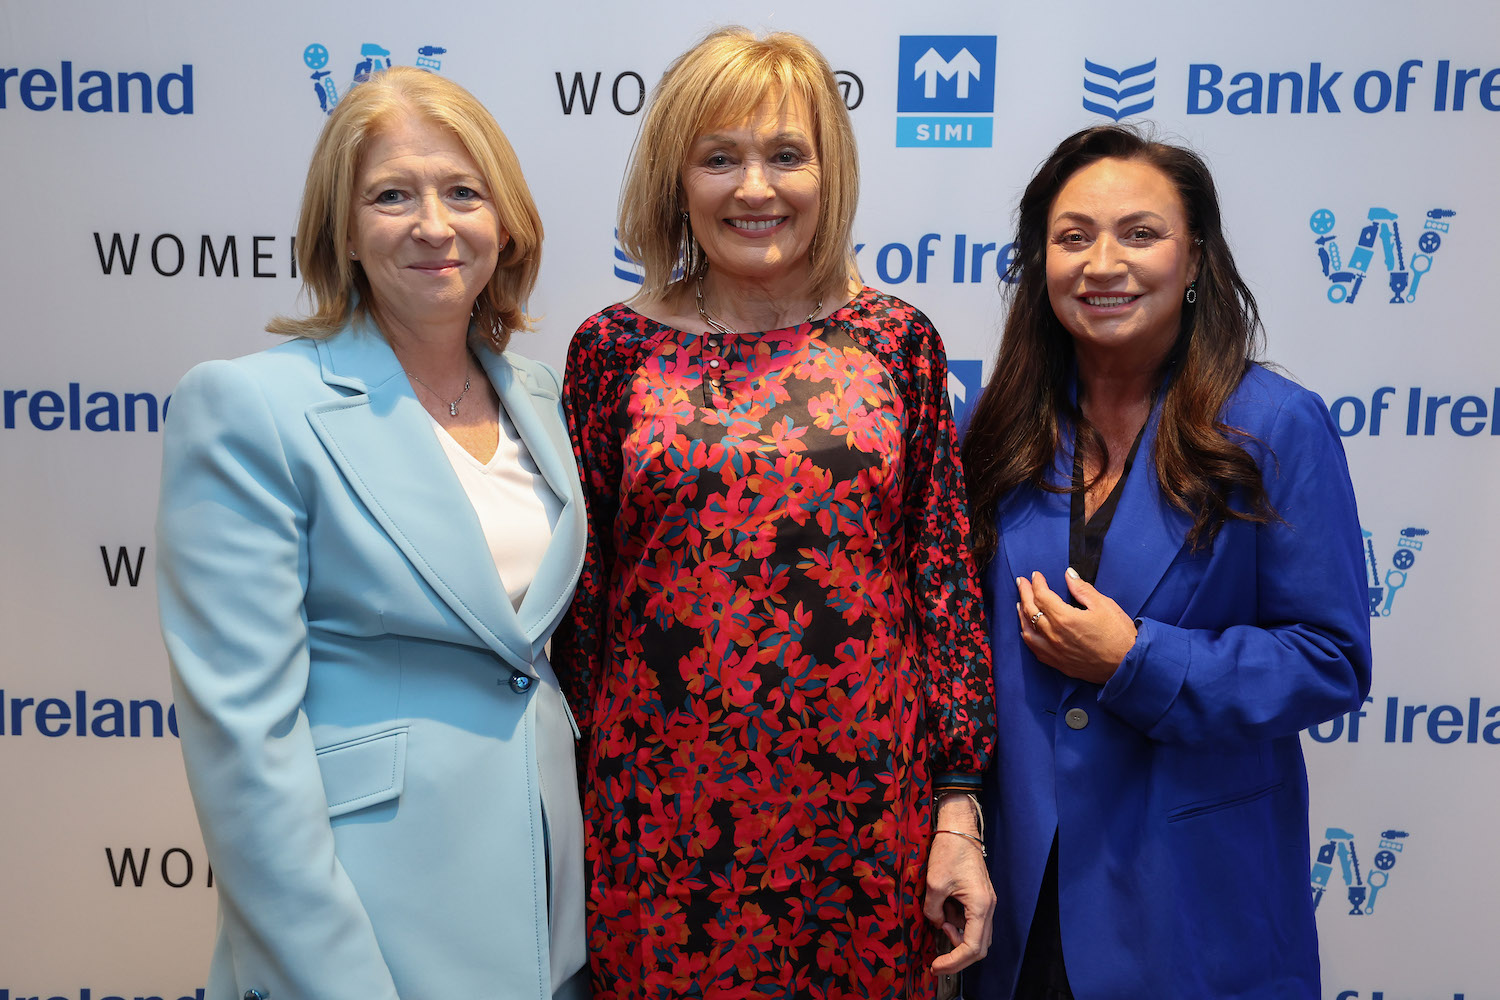 Car Industry News | Women ‘should join motor industry’ | CompleteCar.ie